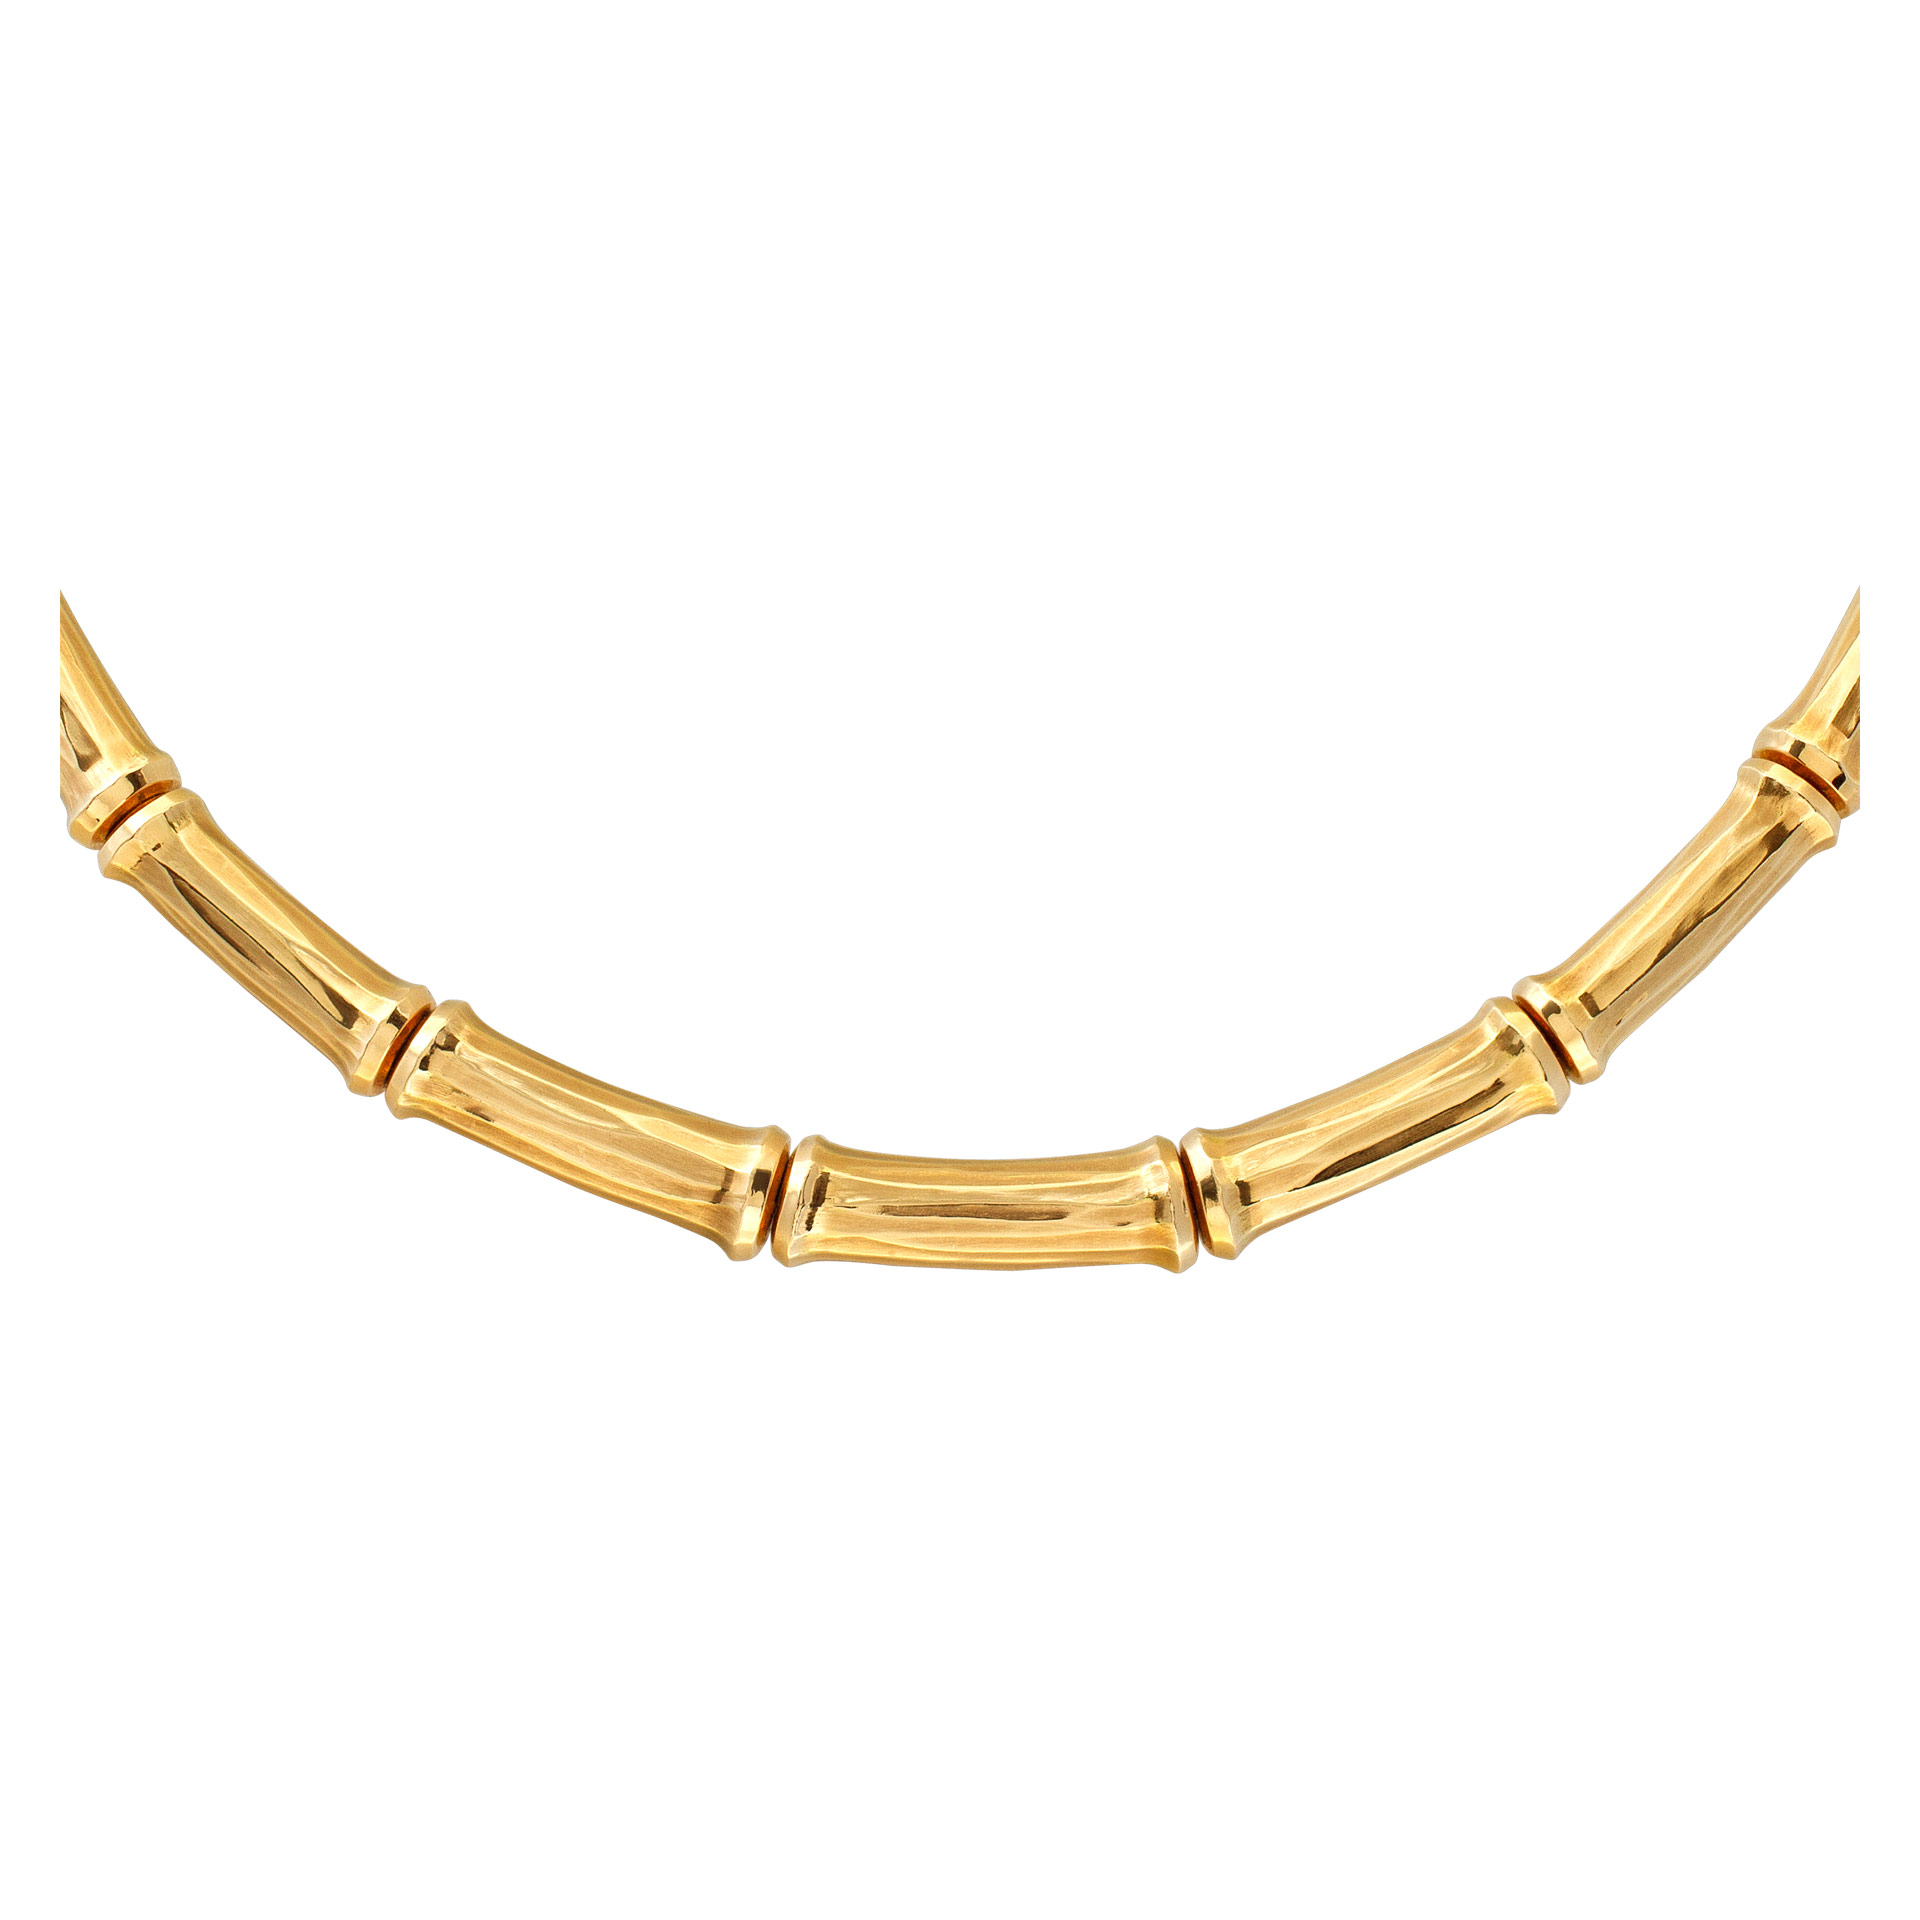 Cartier Bamboo choker/necklace in yellow gold. 16.5" length image 1